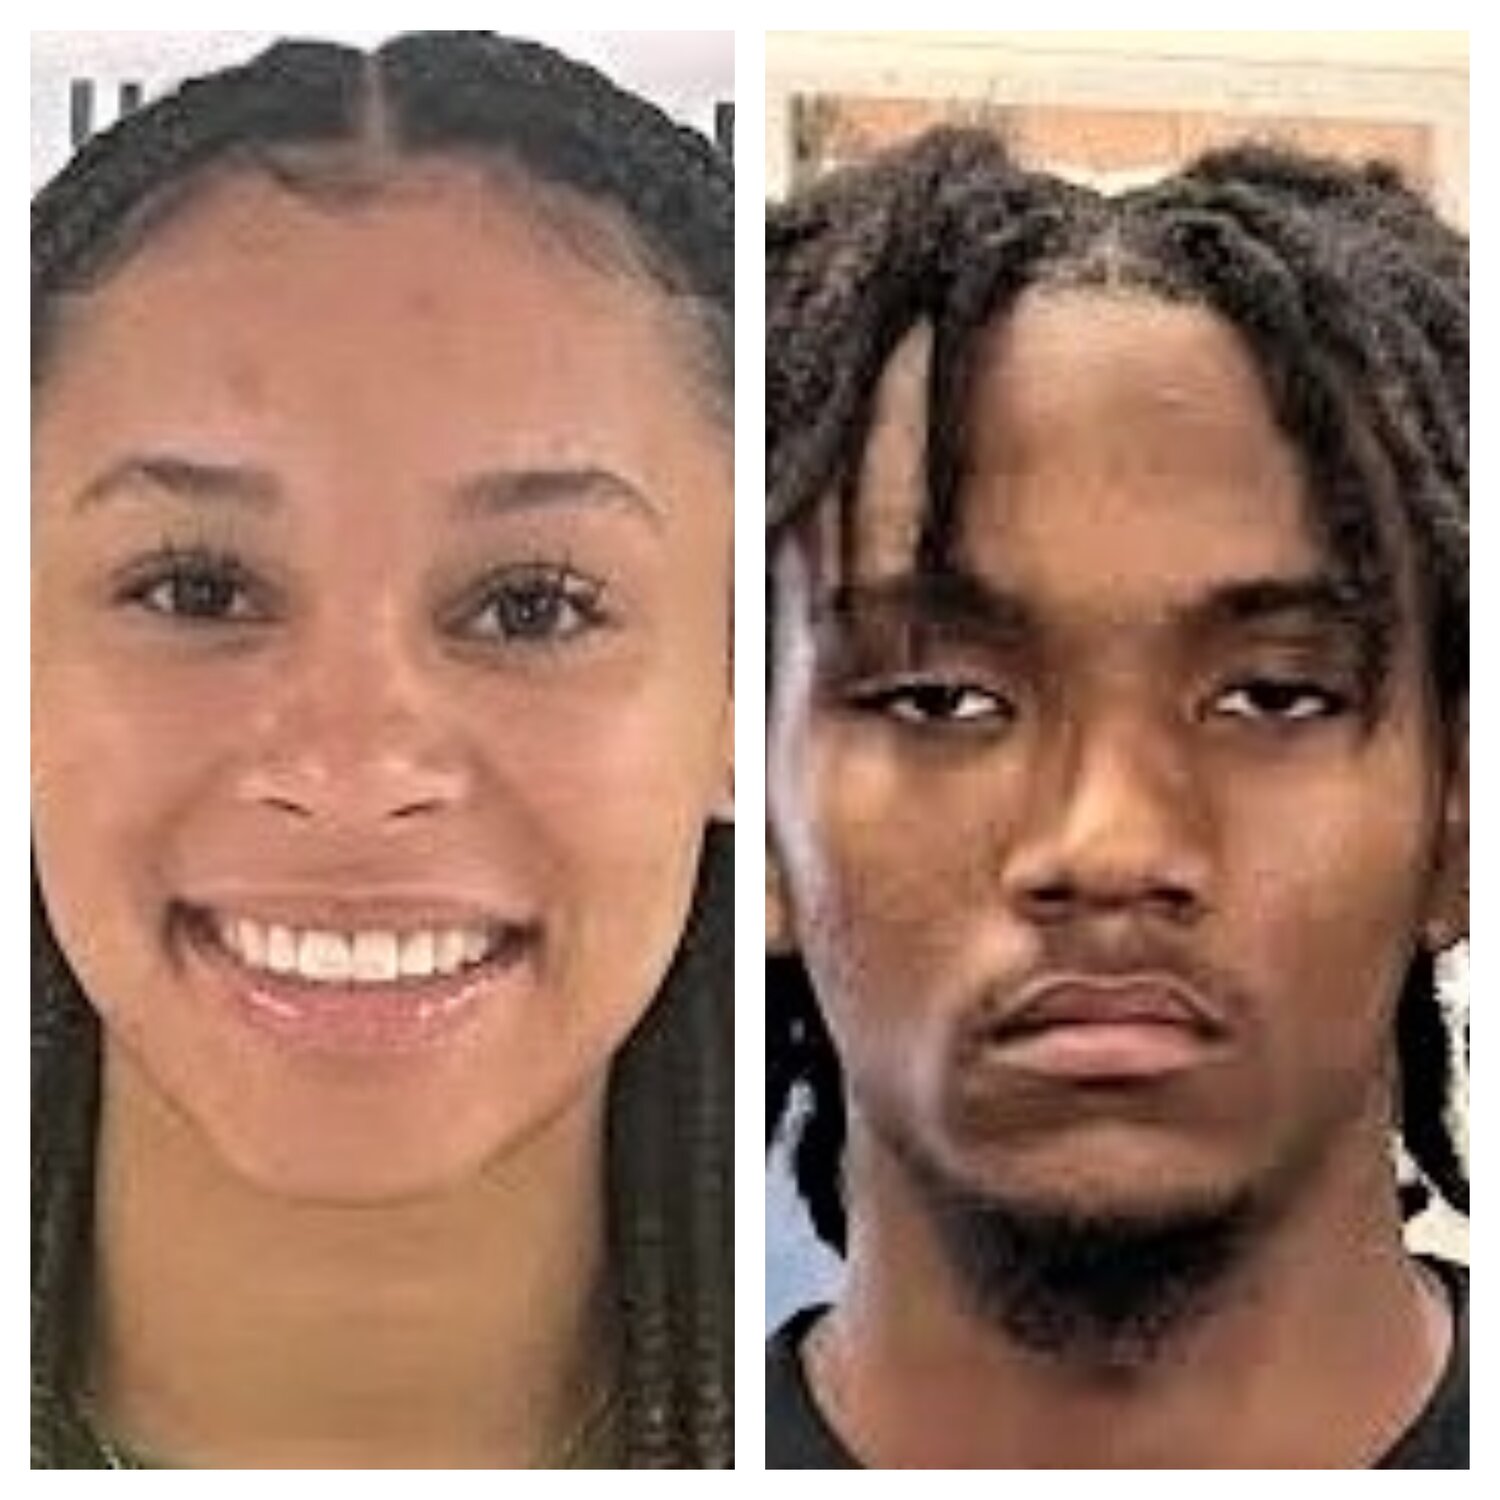 Athletes of the Week are Allyson Rouse, Pine Forest, volleyball, and Rico McDonald, Cape Fear, football.